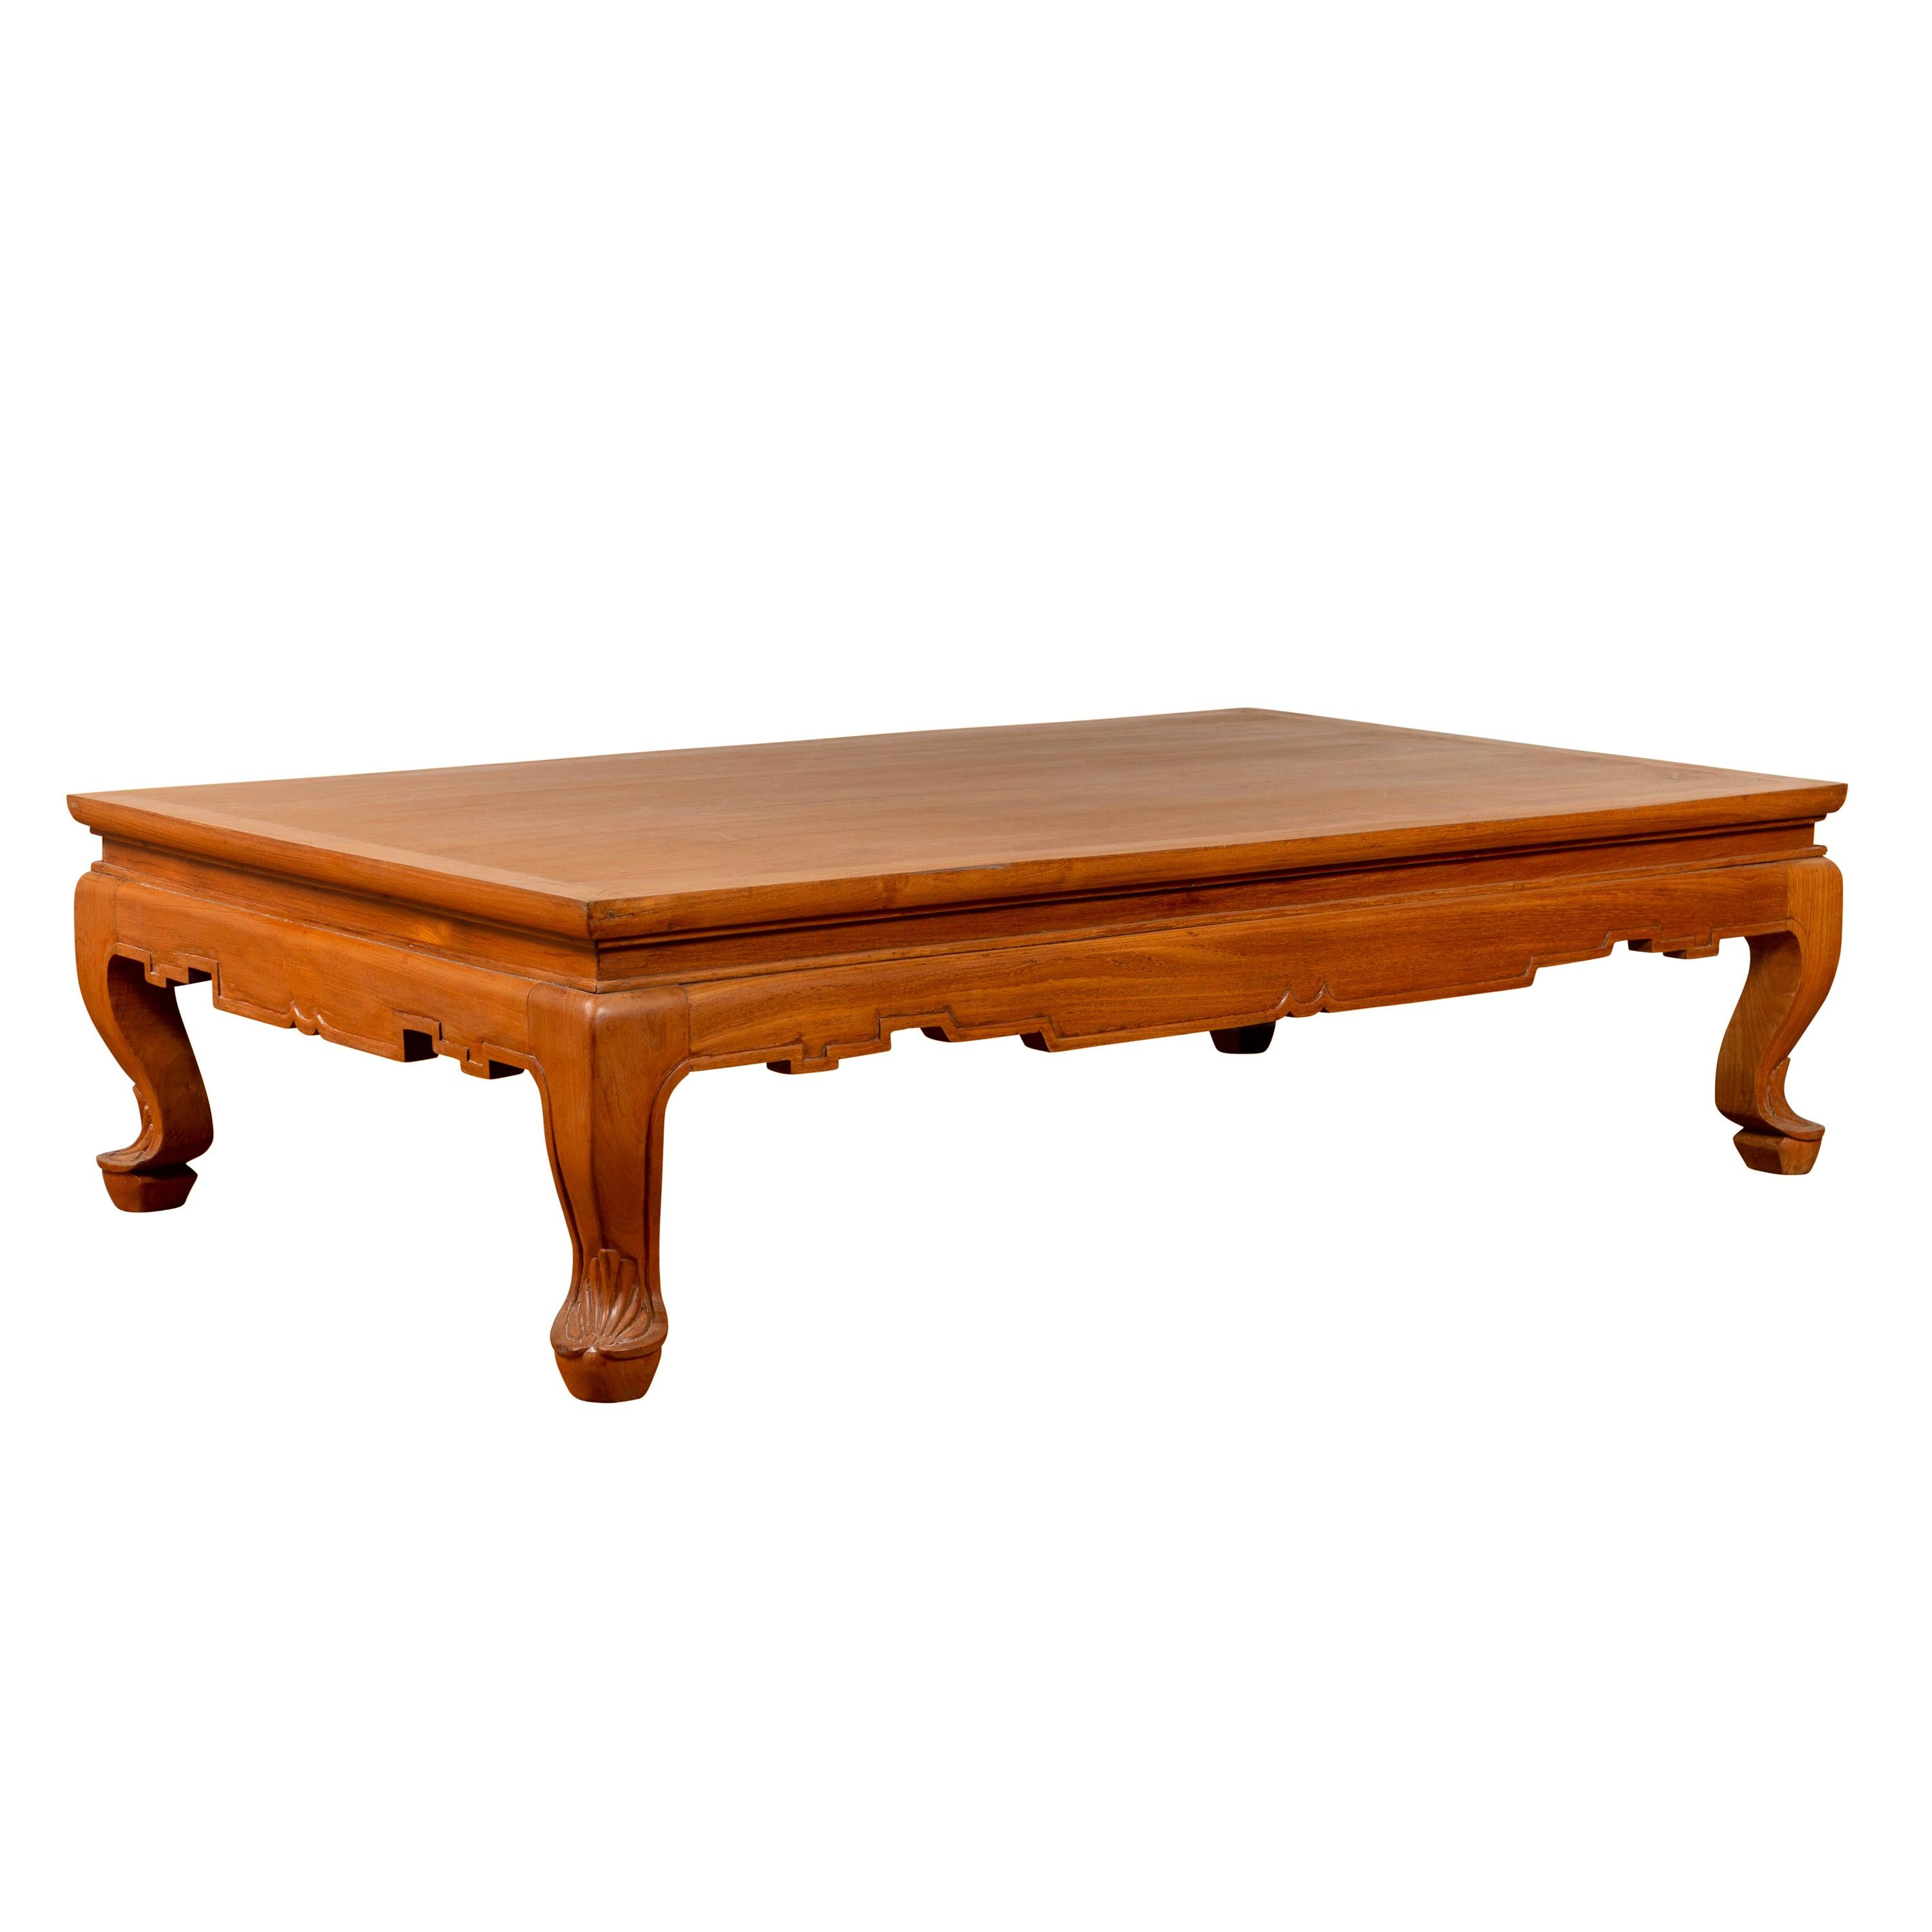 Vintage Thai Teak Coffee Table with Waisted Top, Carved Apron and Cabriole Legs